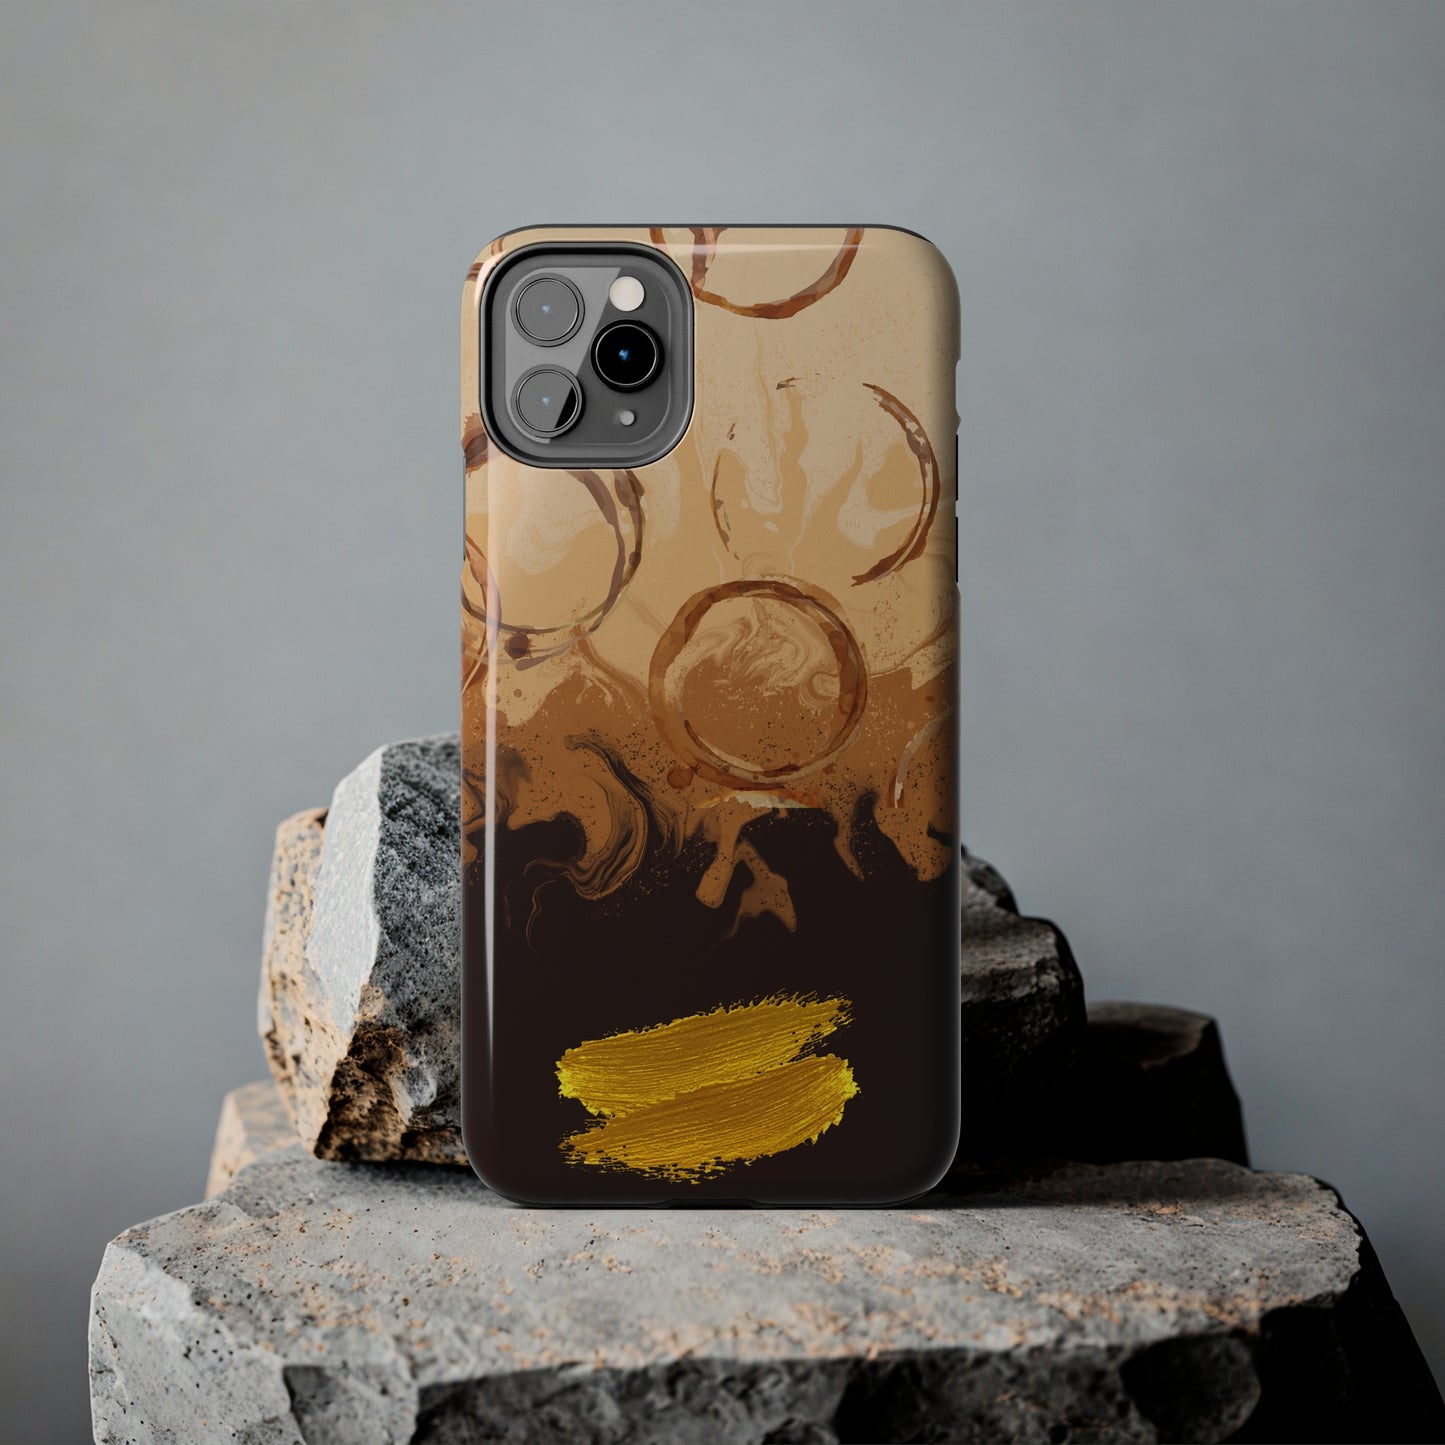 Abstract Coffee & Gold Brushstrokes - iPhone Case